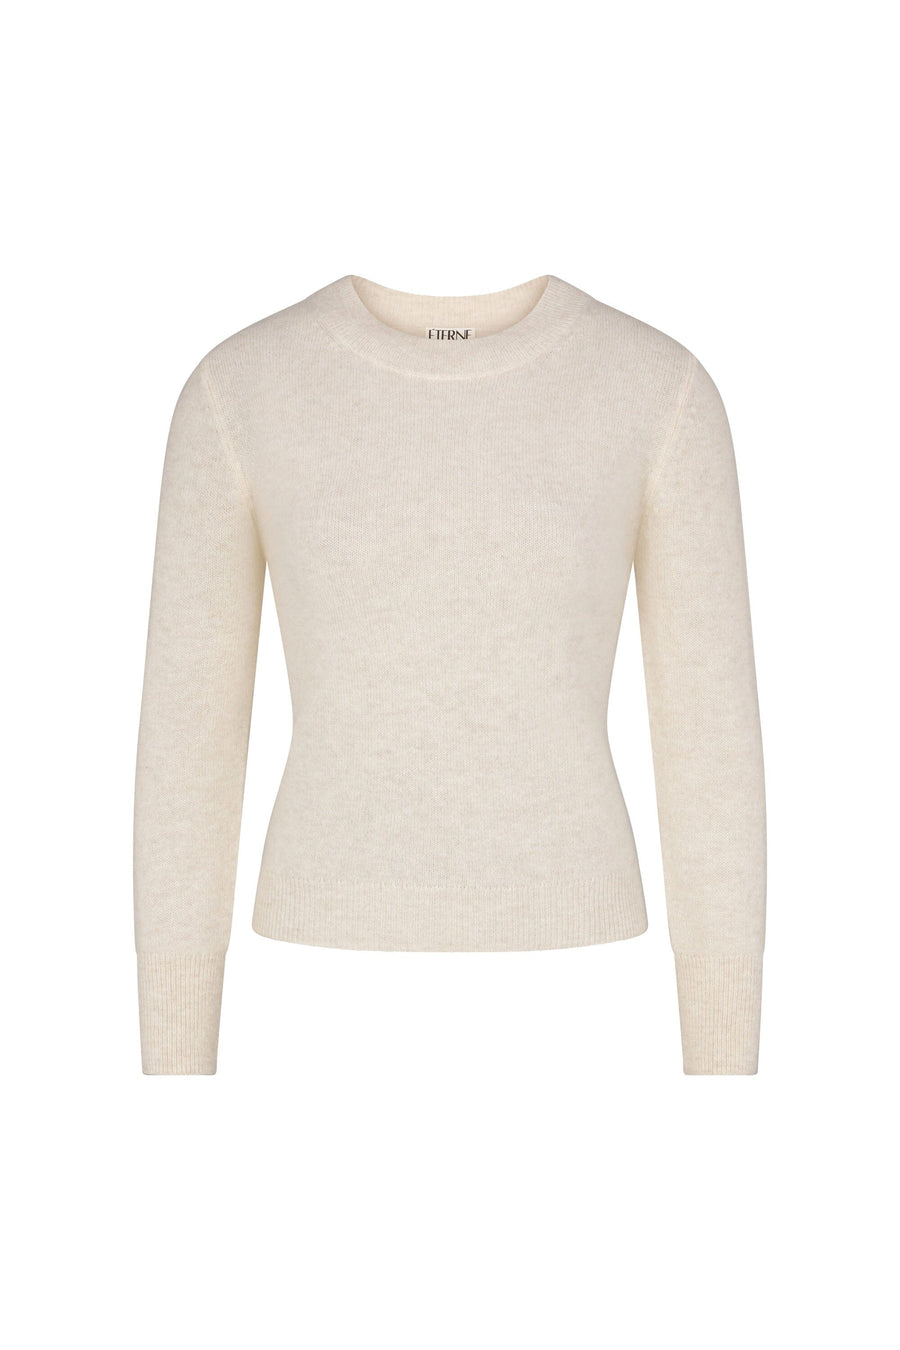 Francis Sweater Oatmeal SWEATERS ÉTERNE 